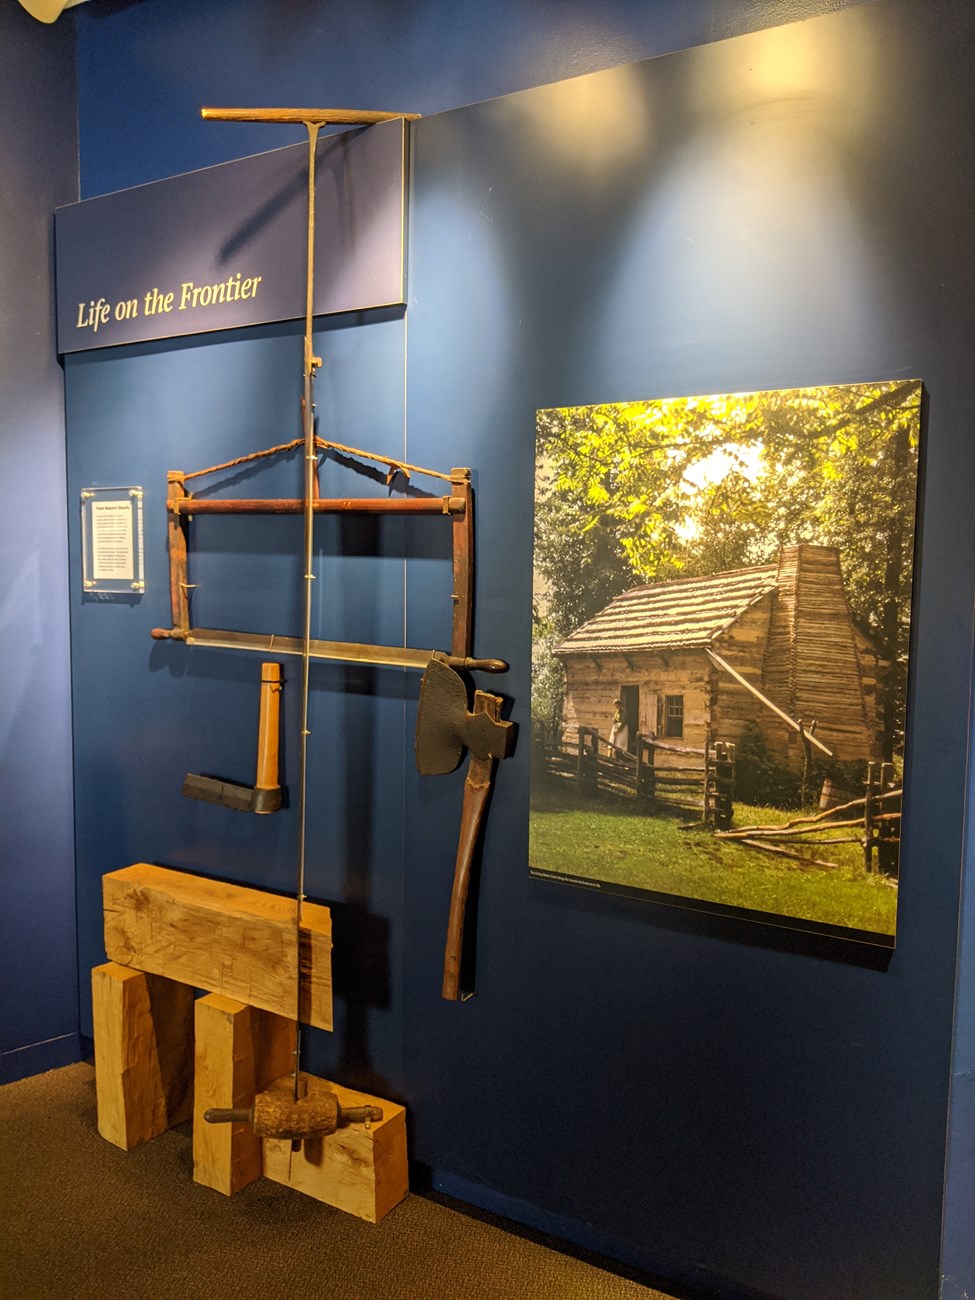 Tools used by pioneers hanging on wall alongside a picture of a log cabin